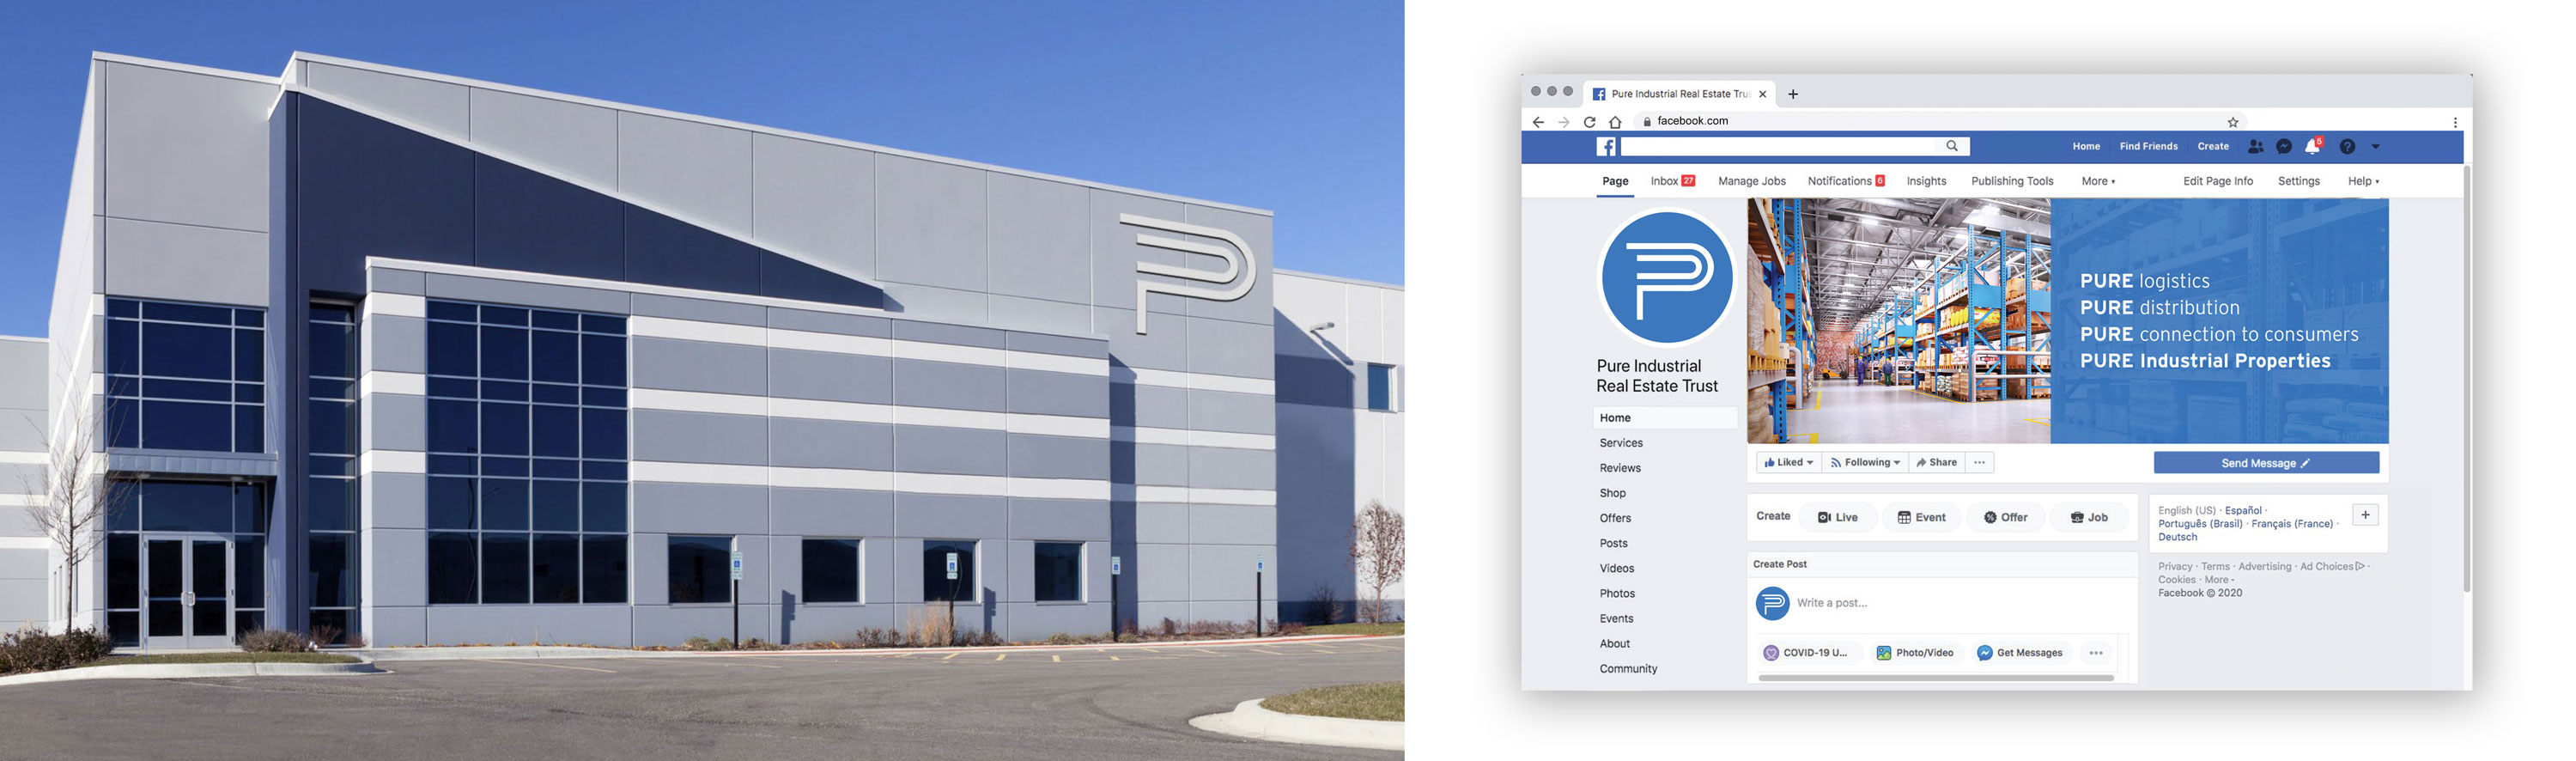 P logo used in white on building exterior signage and facebook page design with strategy statement on blue panel